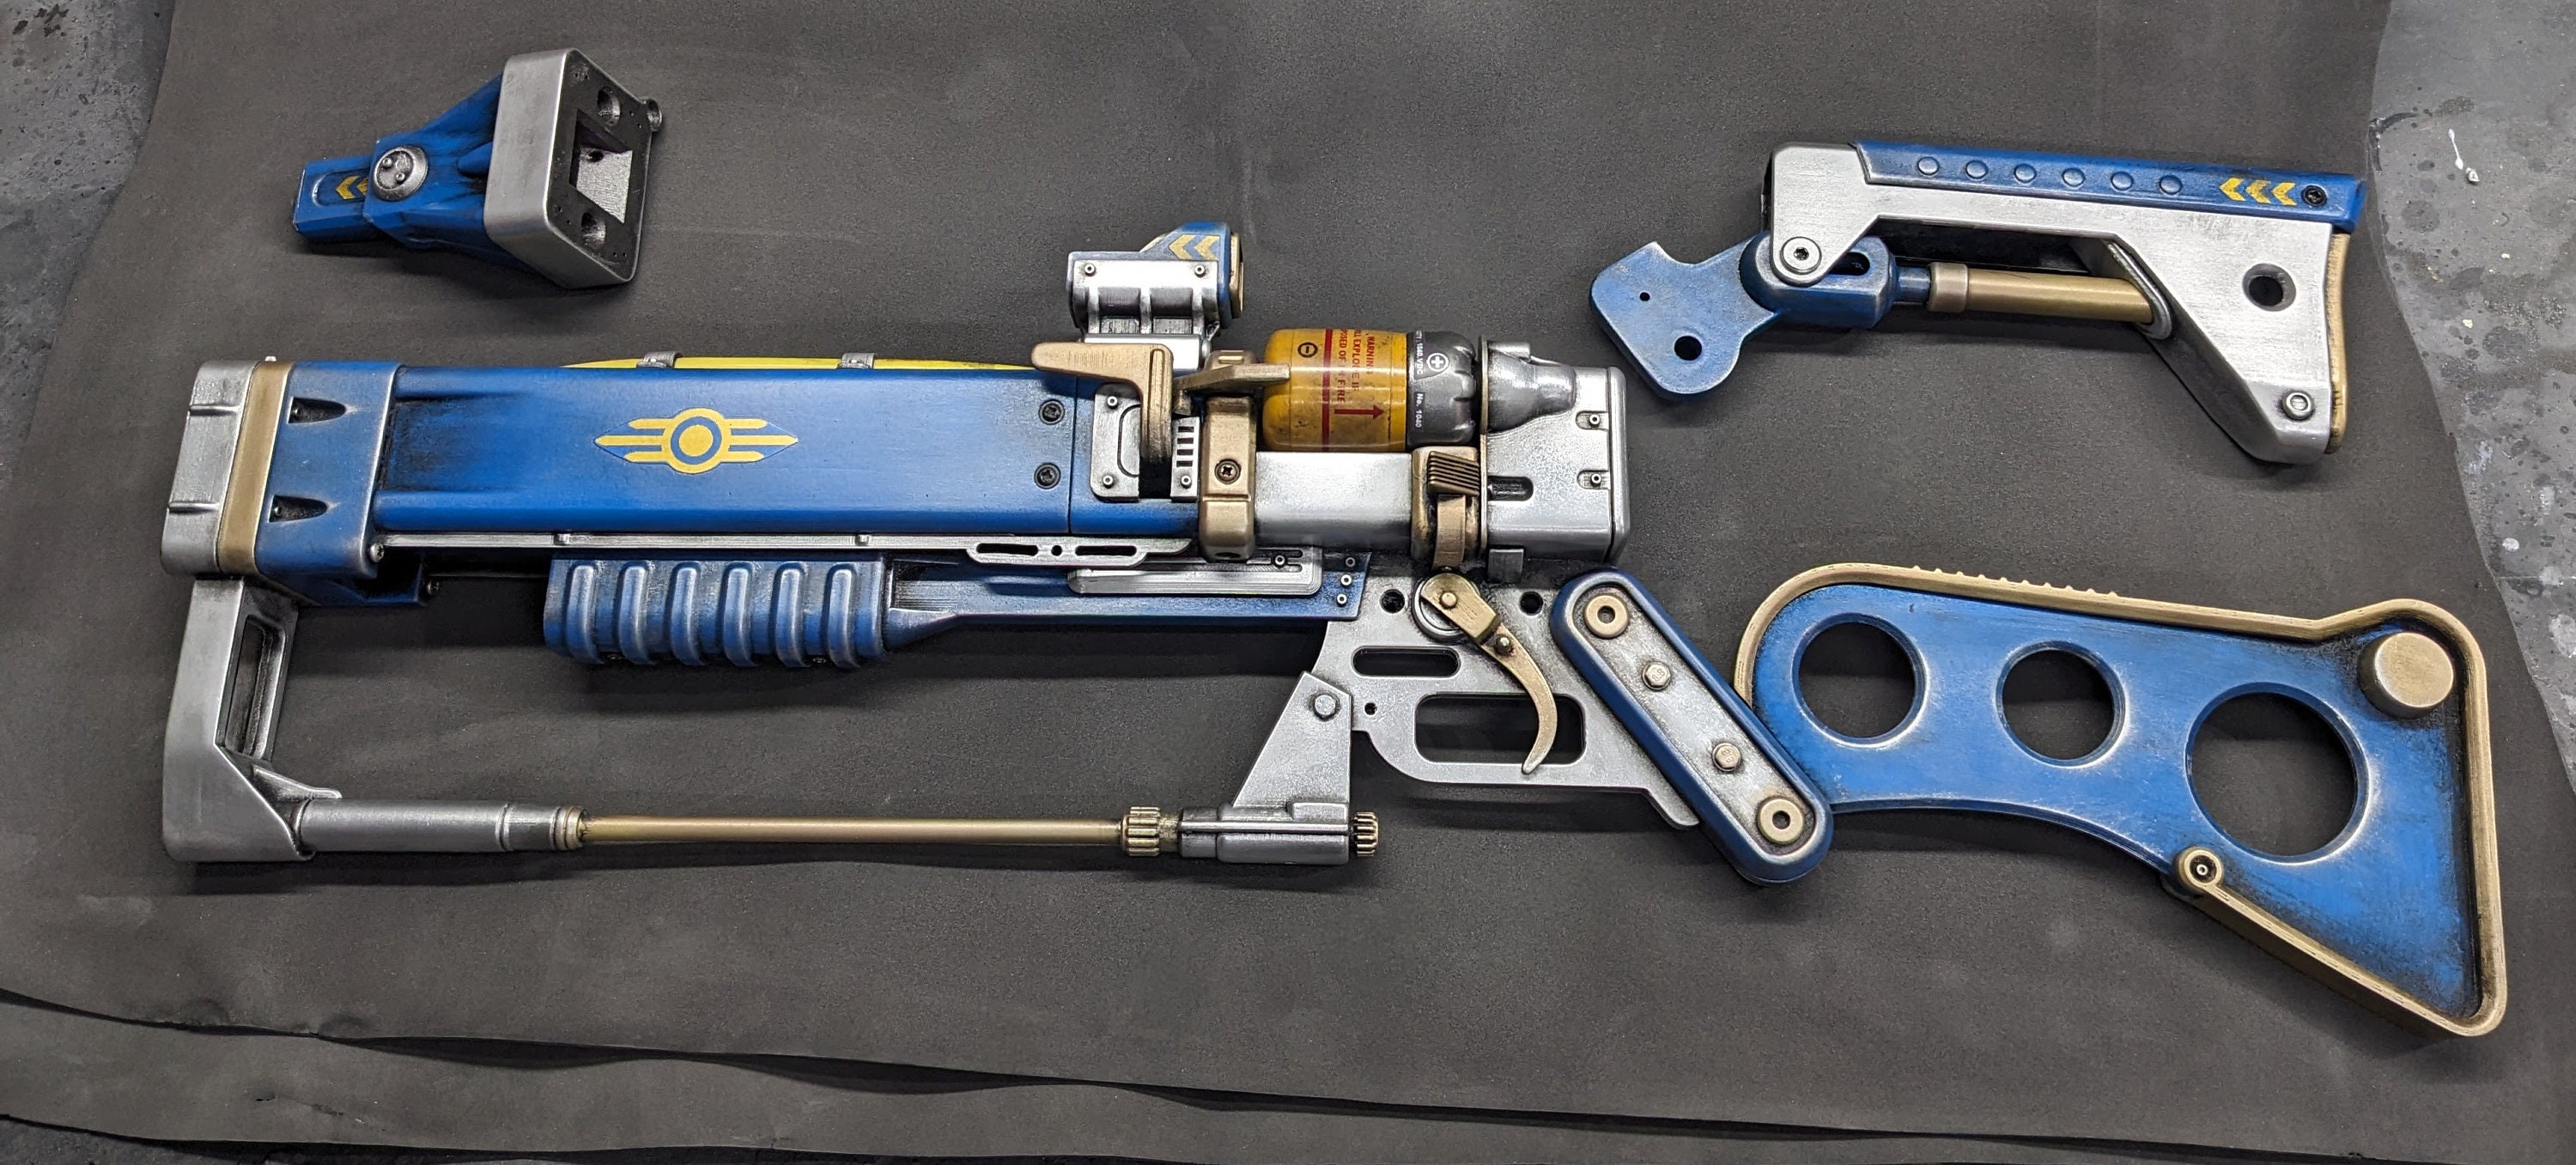 Fallout 4 Fallout 76 Inspired Laser Rifle/ Cosplay Prop modification  Available 